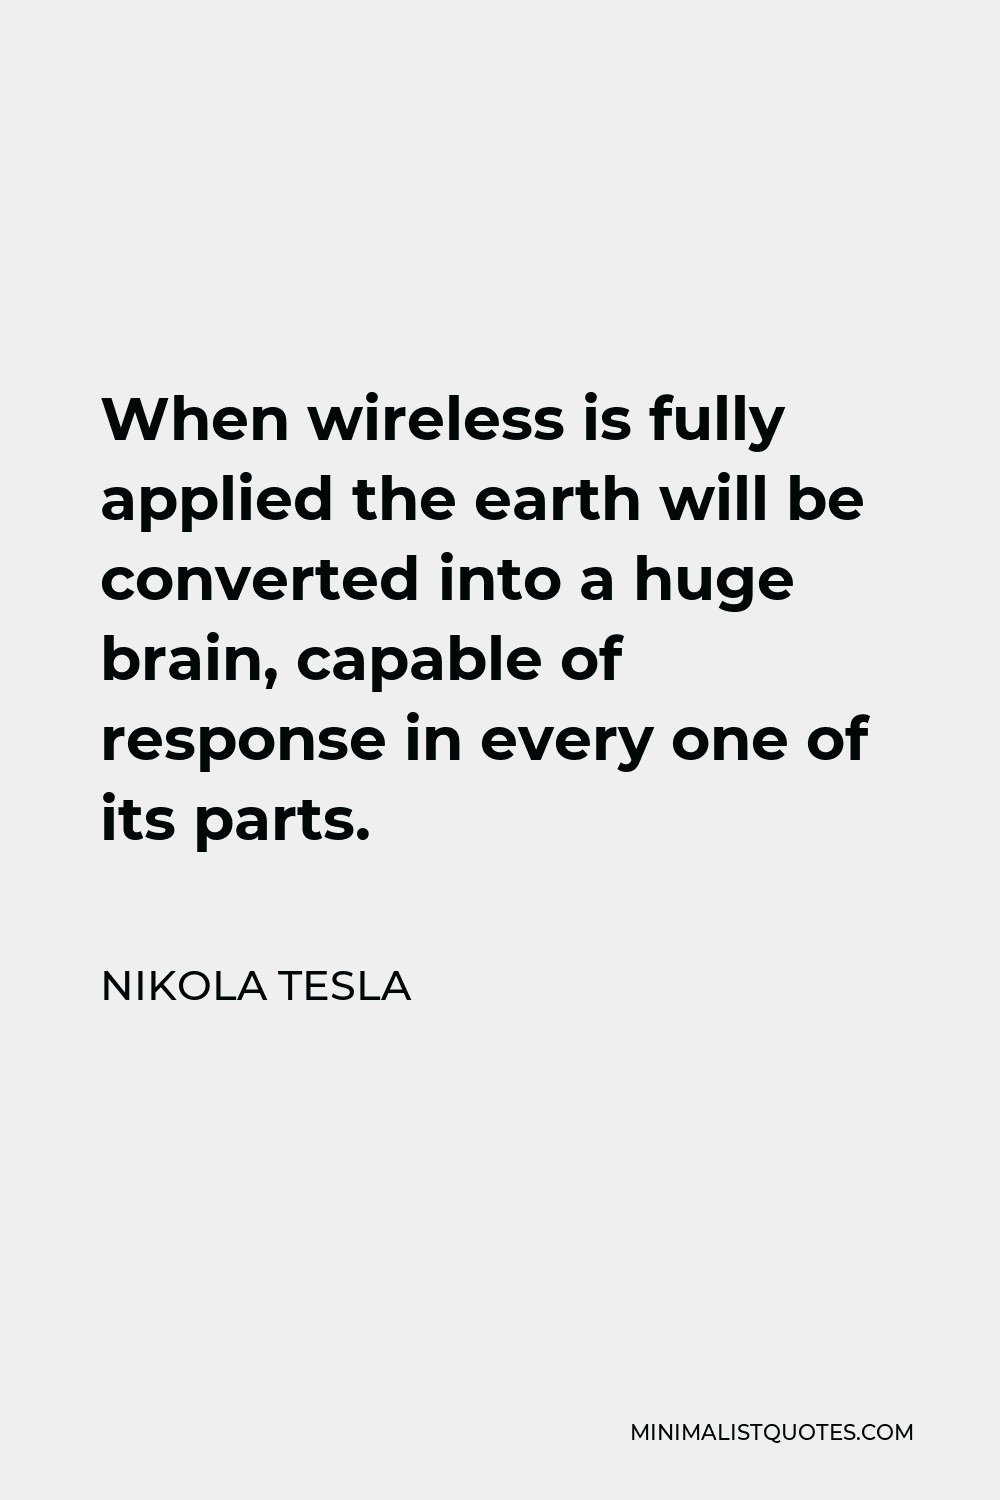 Nikola Tesla Quote - When wireless is fully applied the earth will be converted into a huge brain, capable of response in every one of its parts.